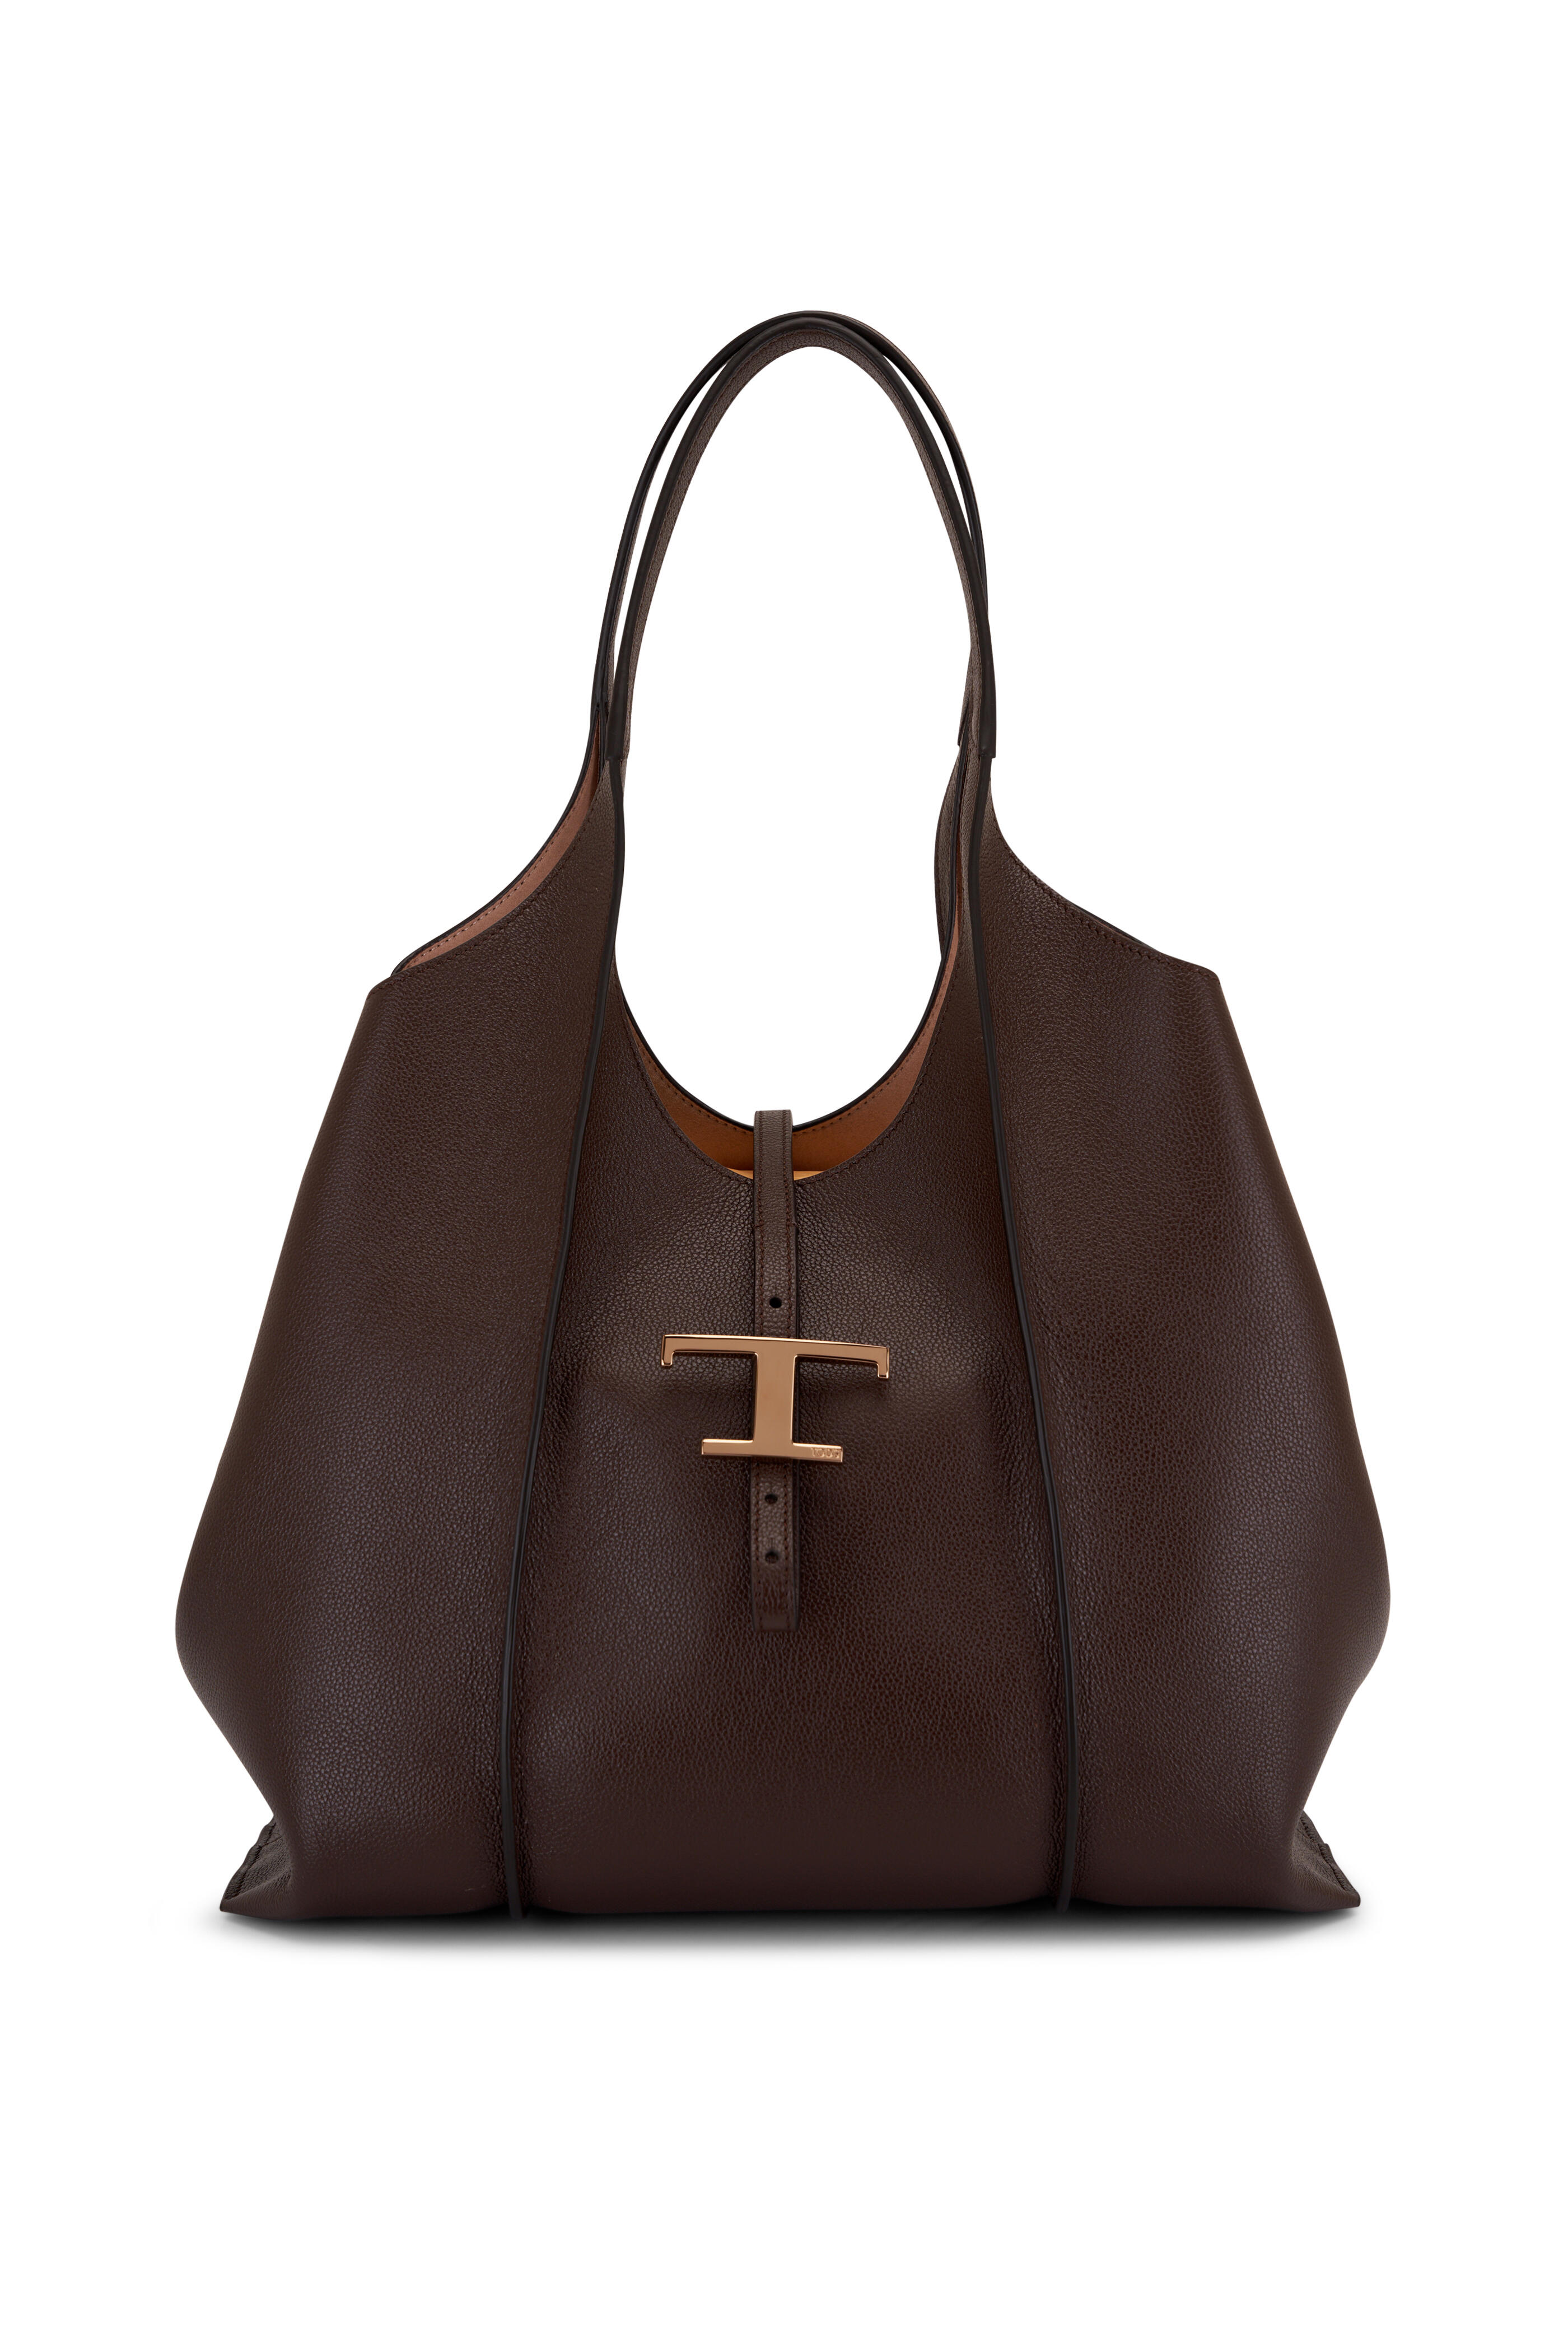 Tod's - Timeless Shopping Bag Maroon Leather Tote